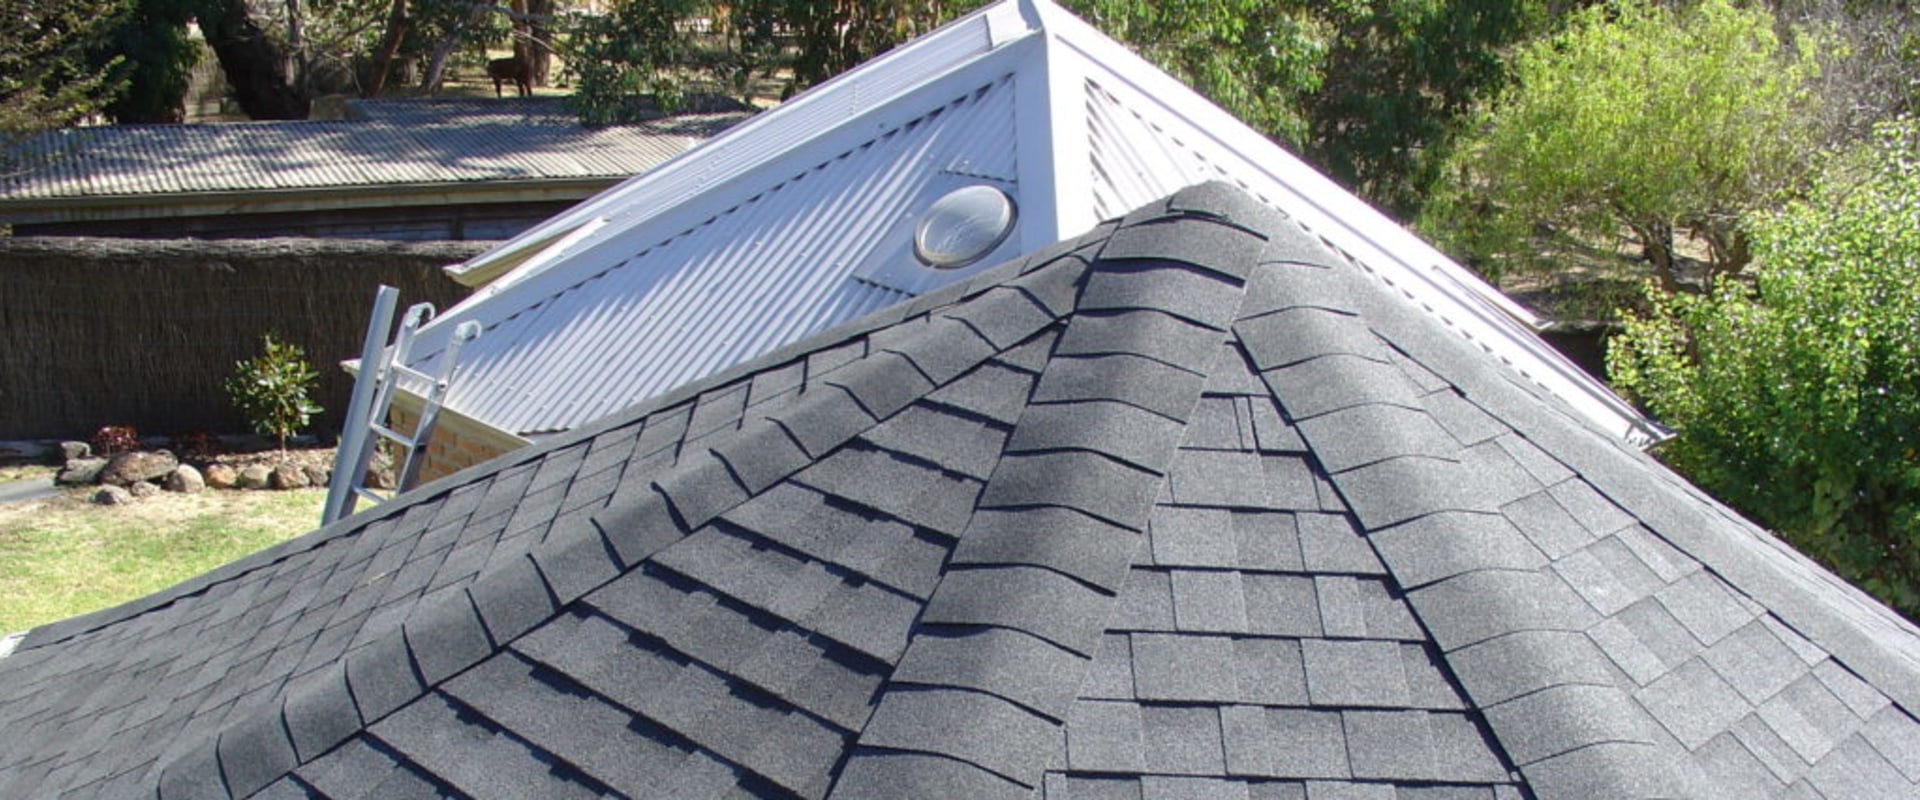 What roofing material is appropriate for the covered path?